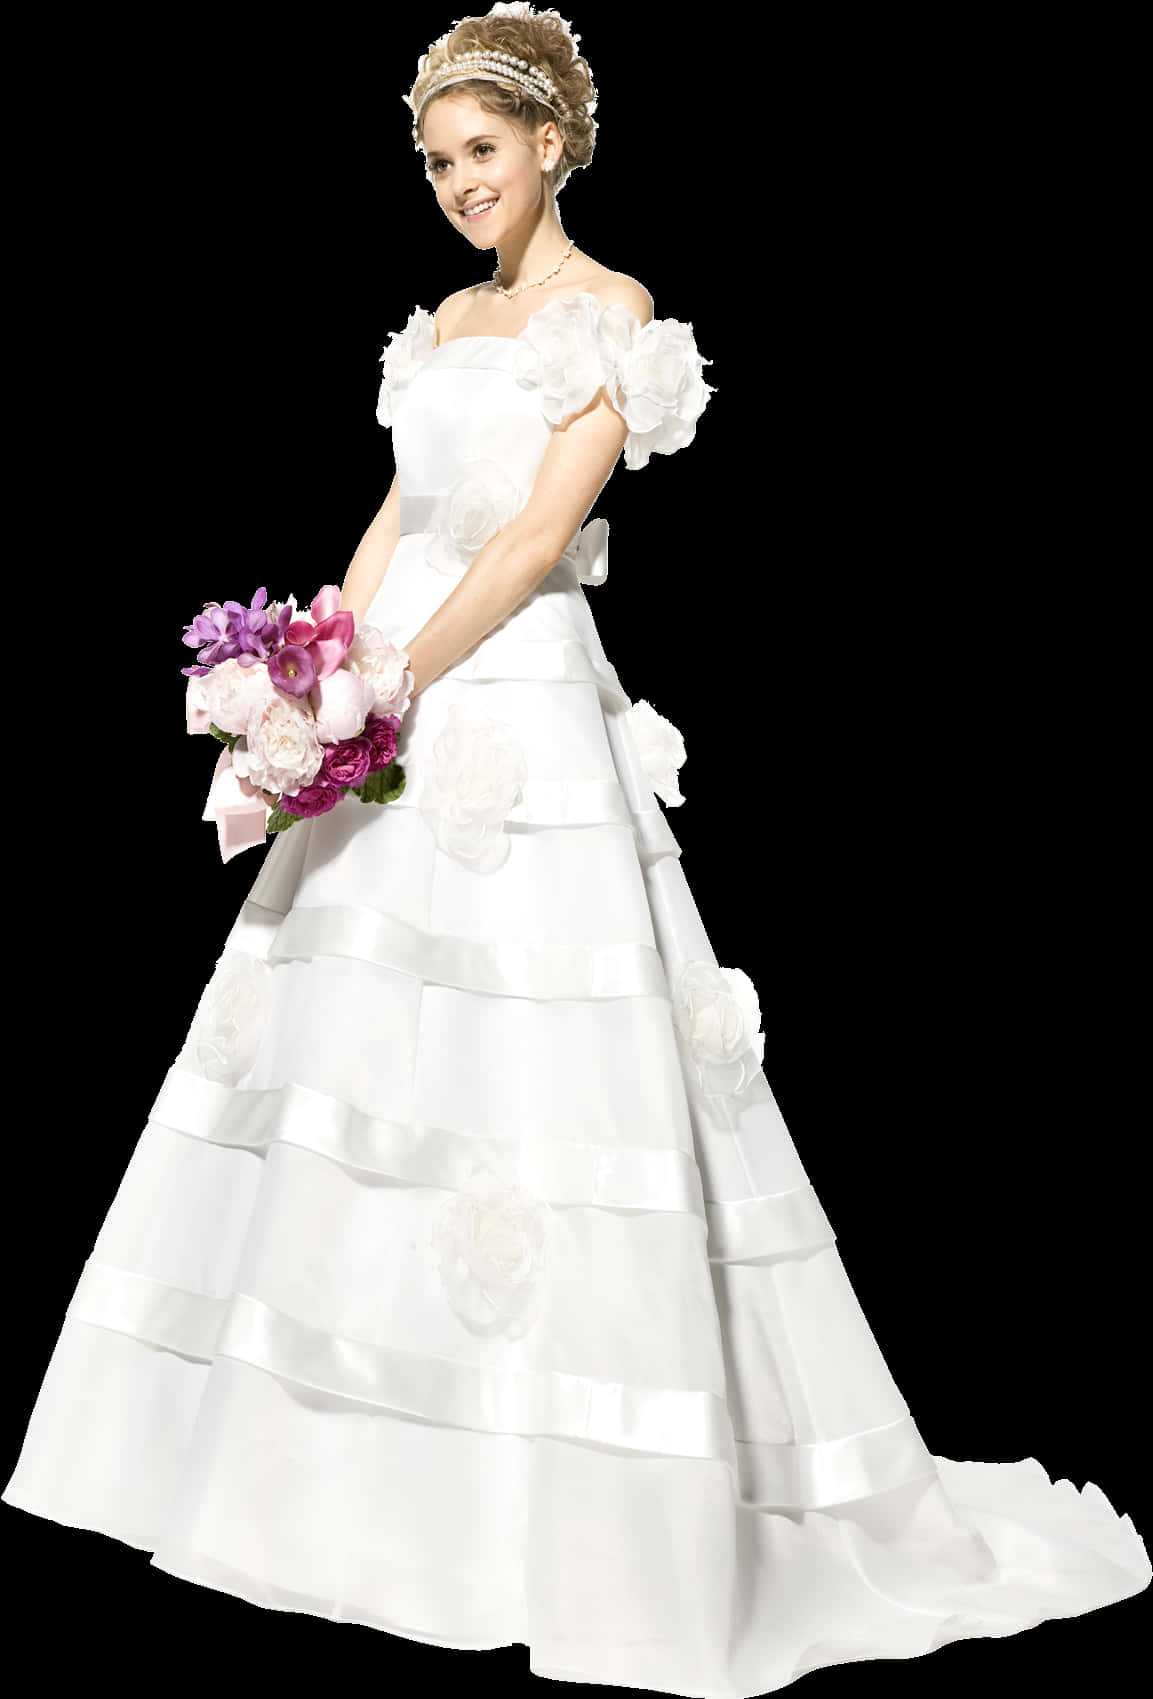 Elegant Bridein White Gownwith Bouquet PNG